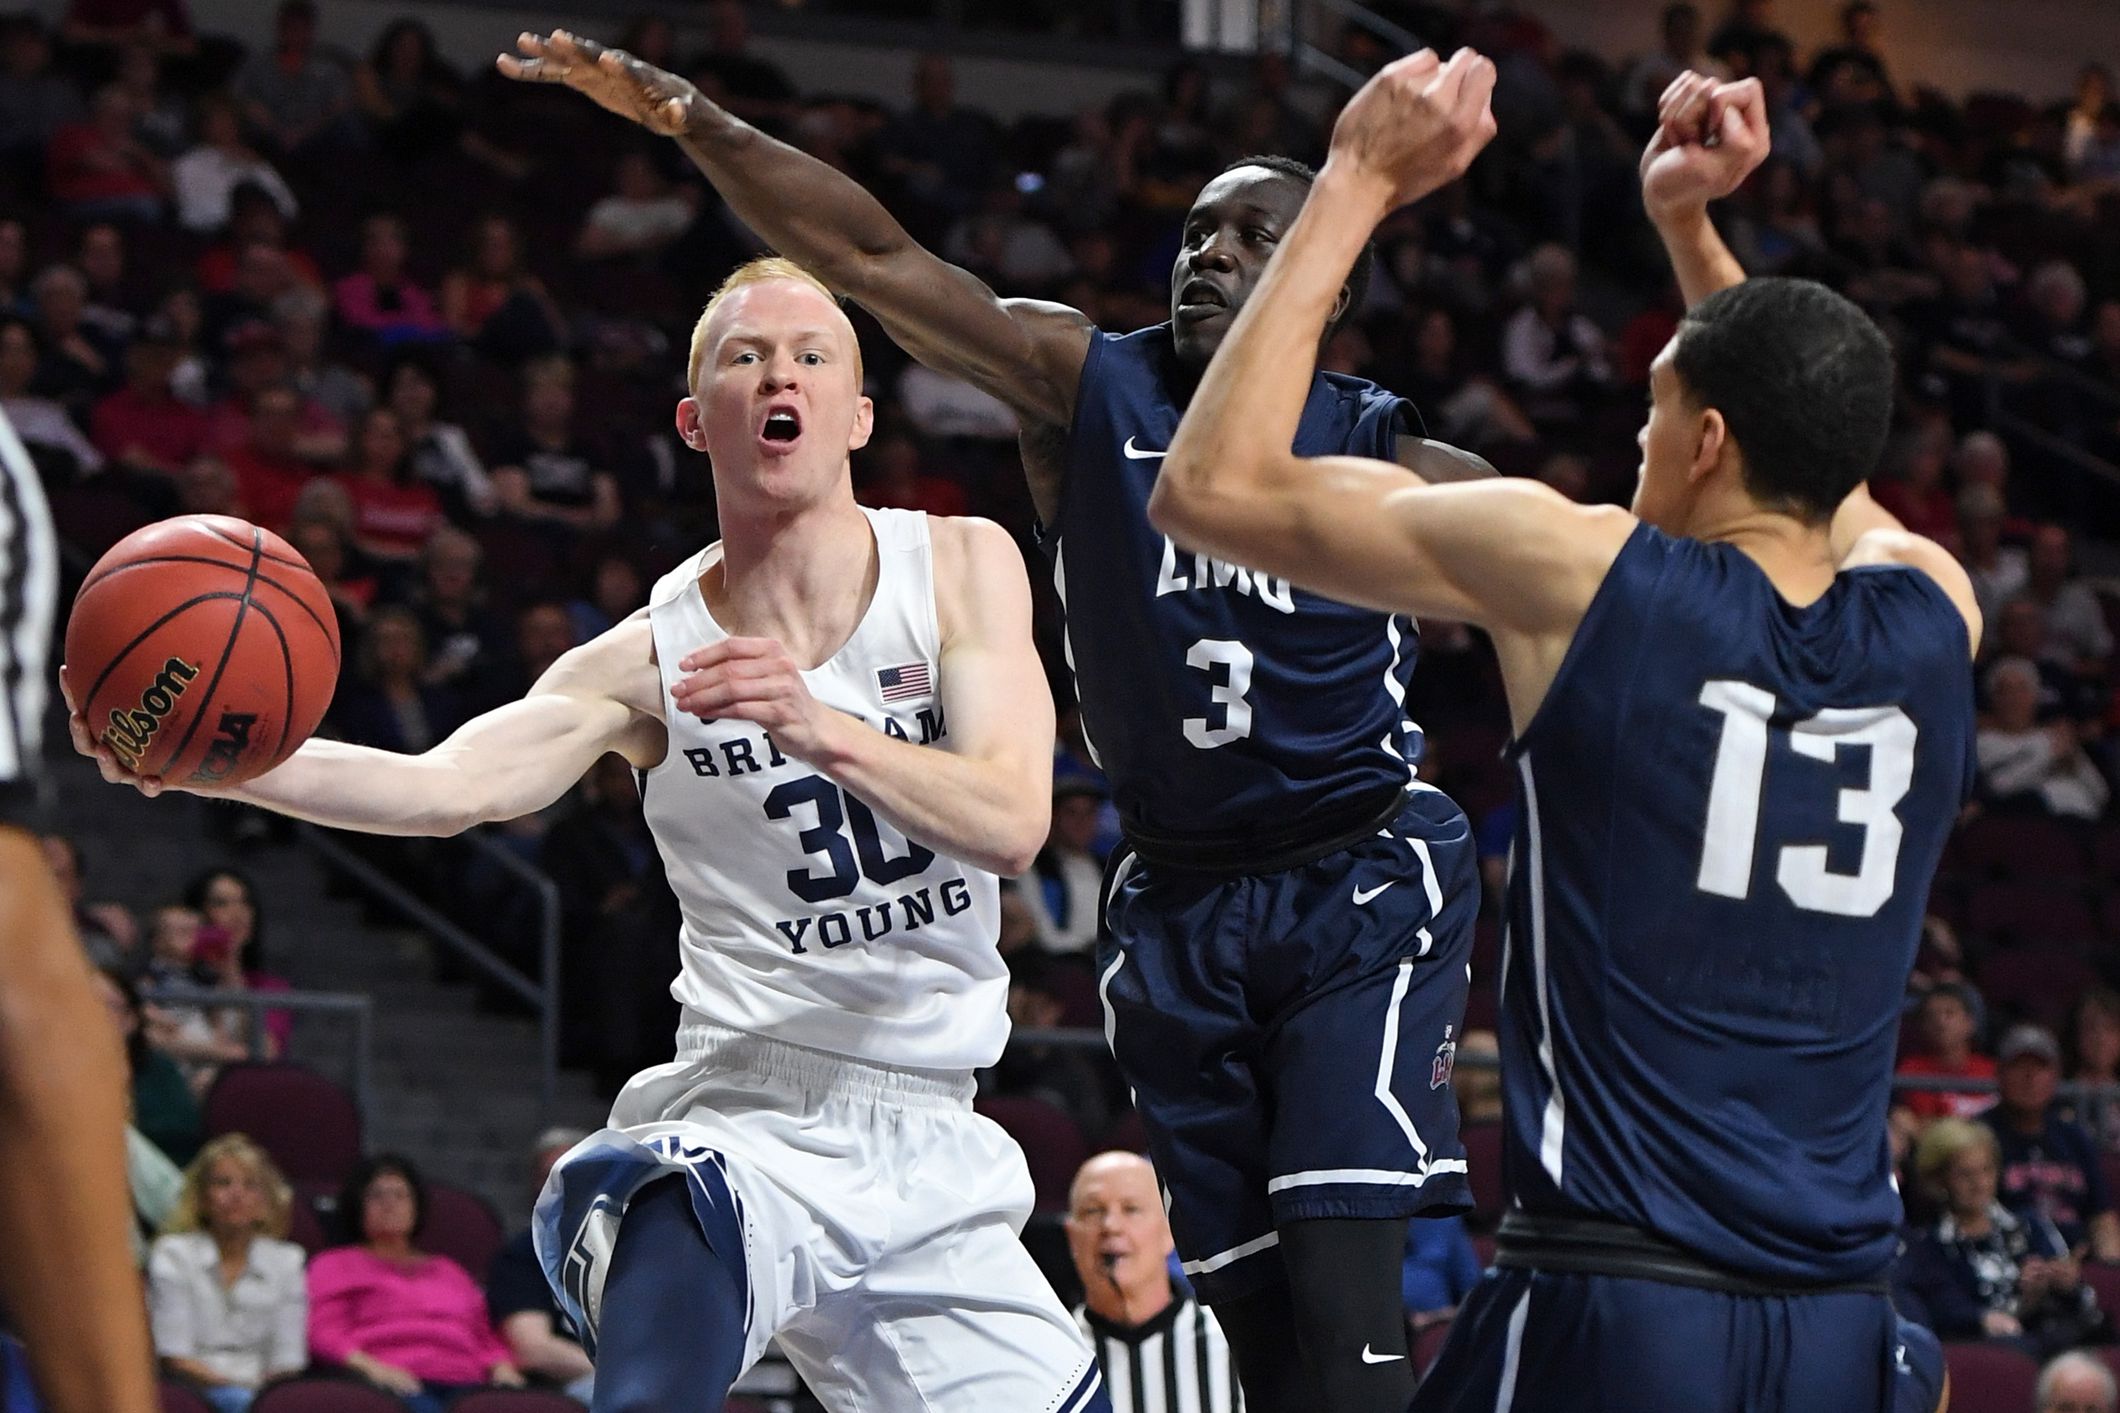 BYU Basketball: A look into all 13 scholarship players on BYU’s roster